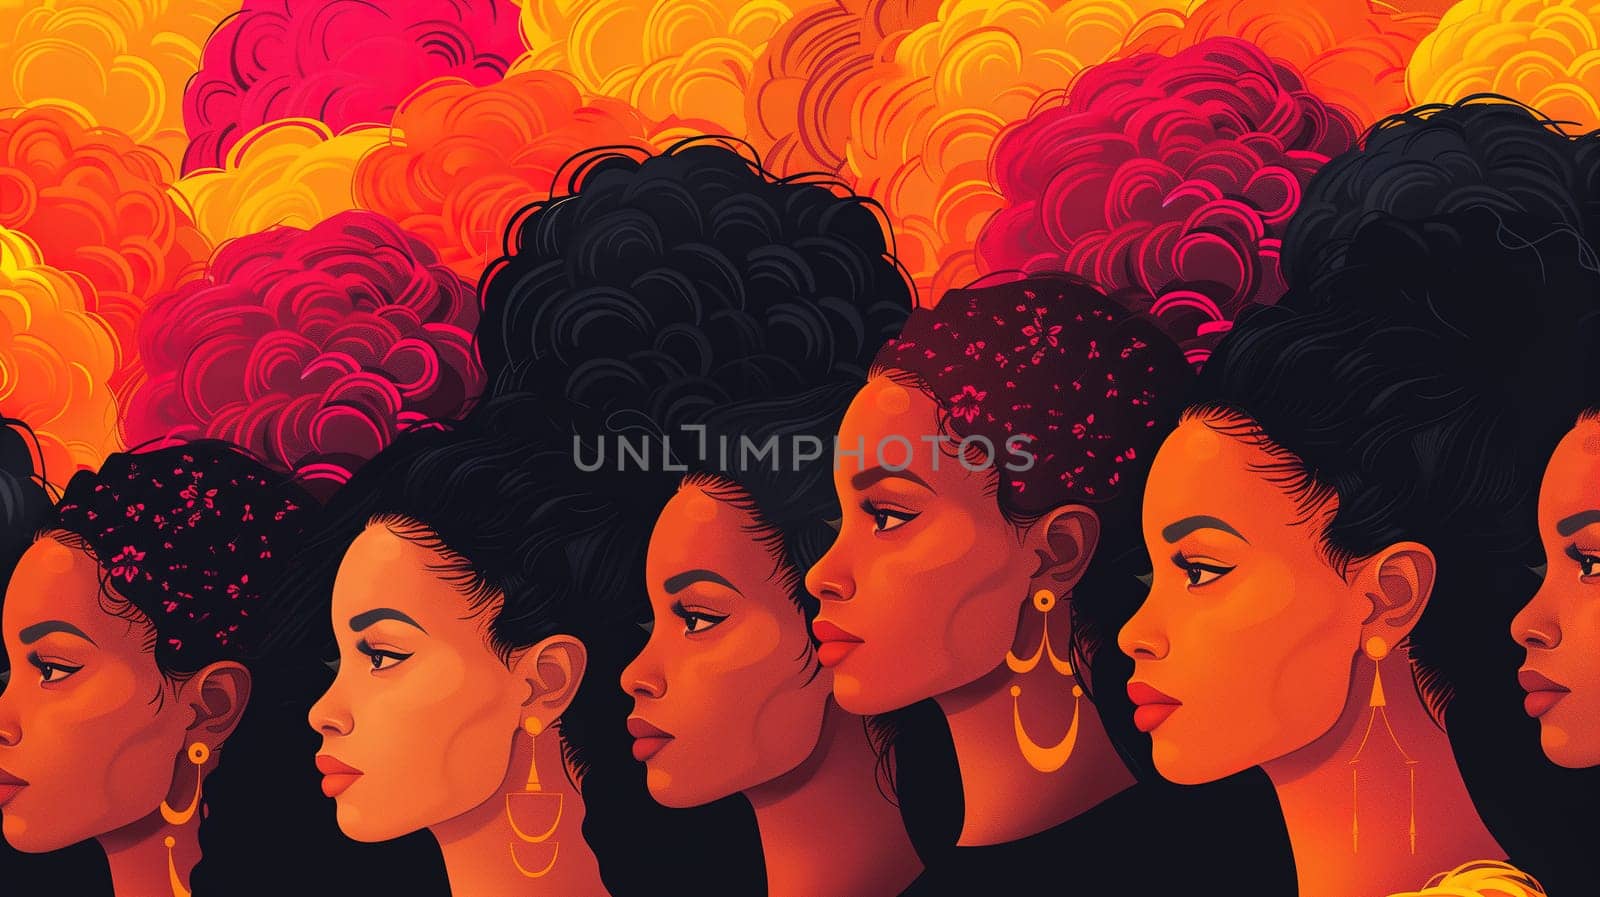 This painting depicts a group of black women standing together, showcasing diversity and unity. The women are of various ages and styles, exuding strength and confidence. Each figure is uniquely detailed, capturing the essence of sisterhood and empowerment.